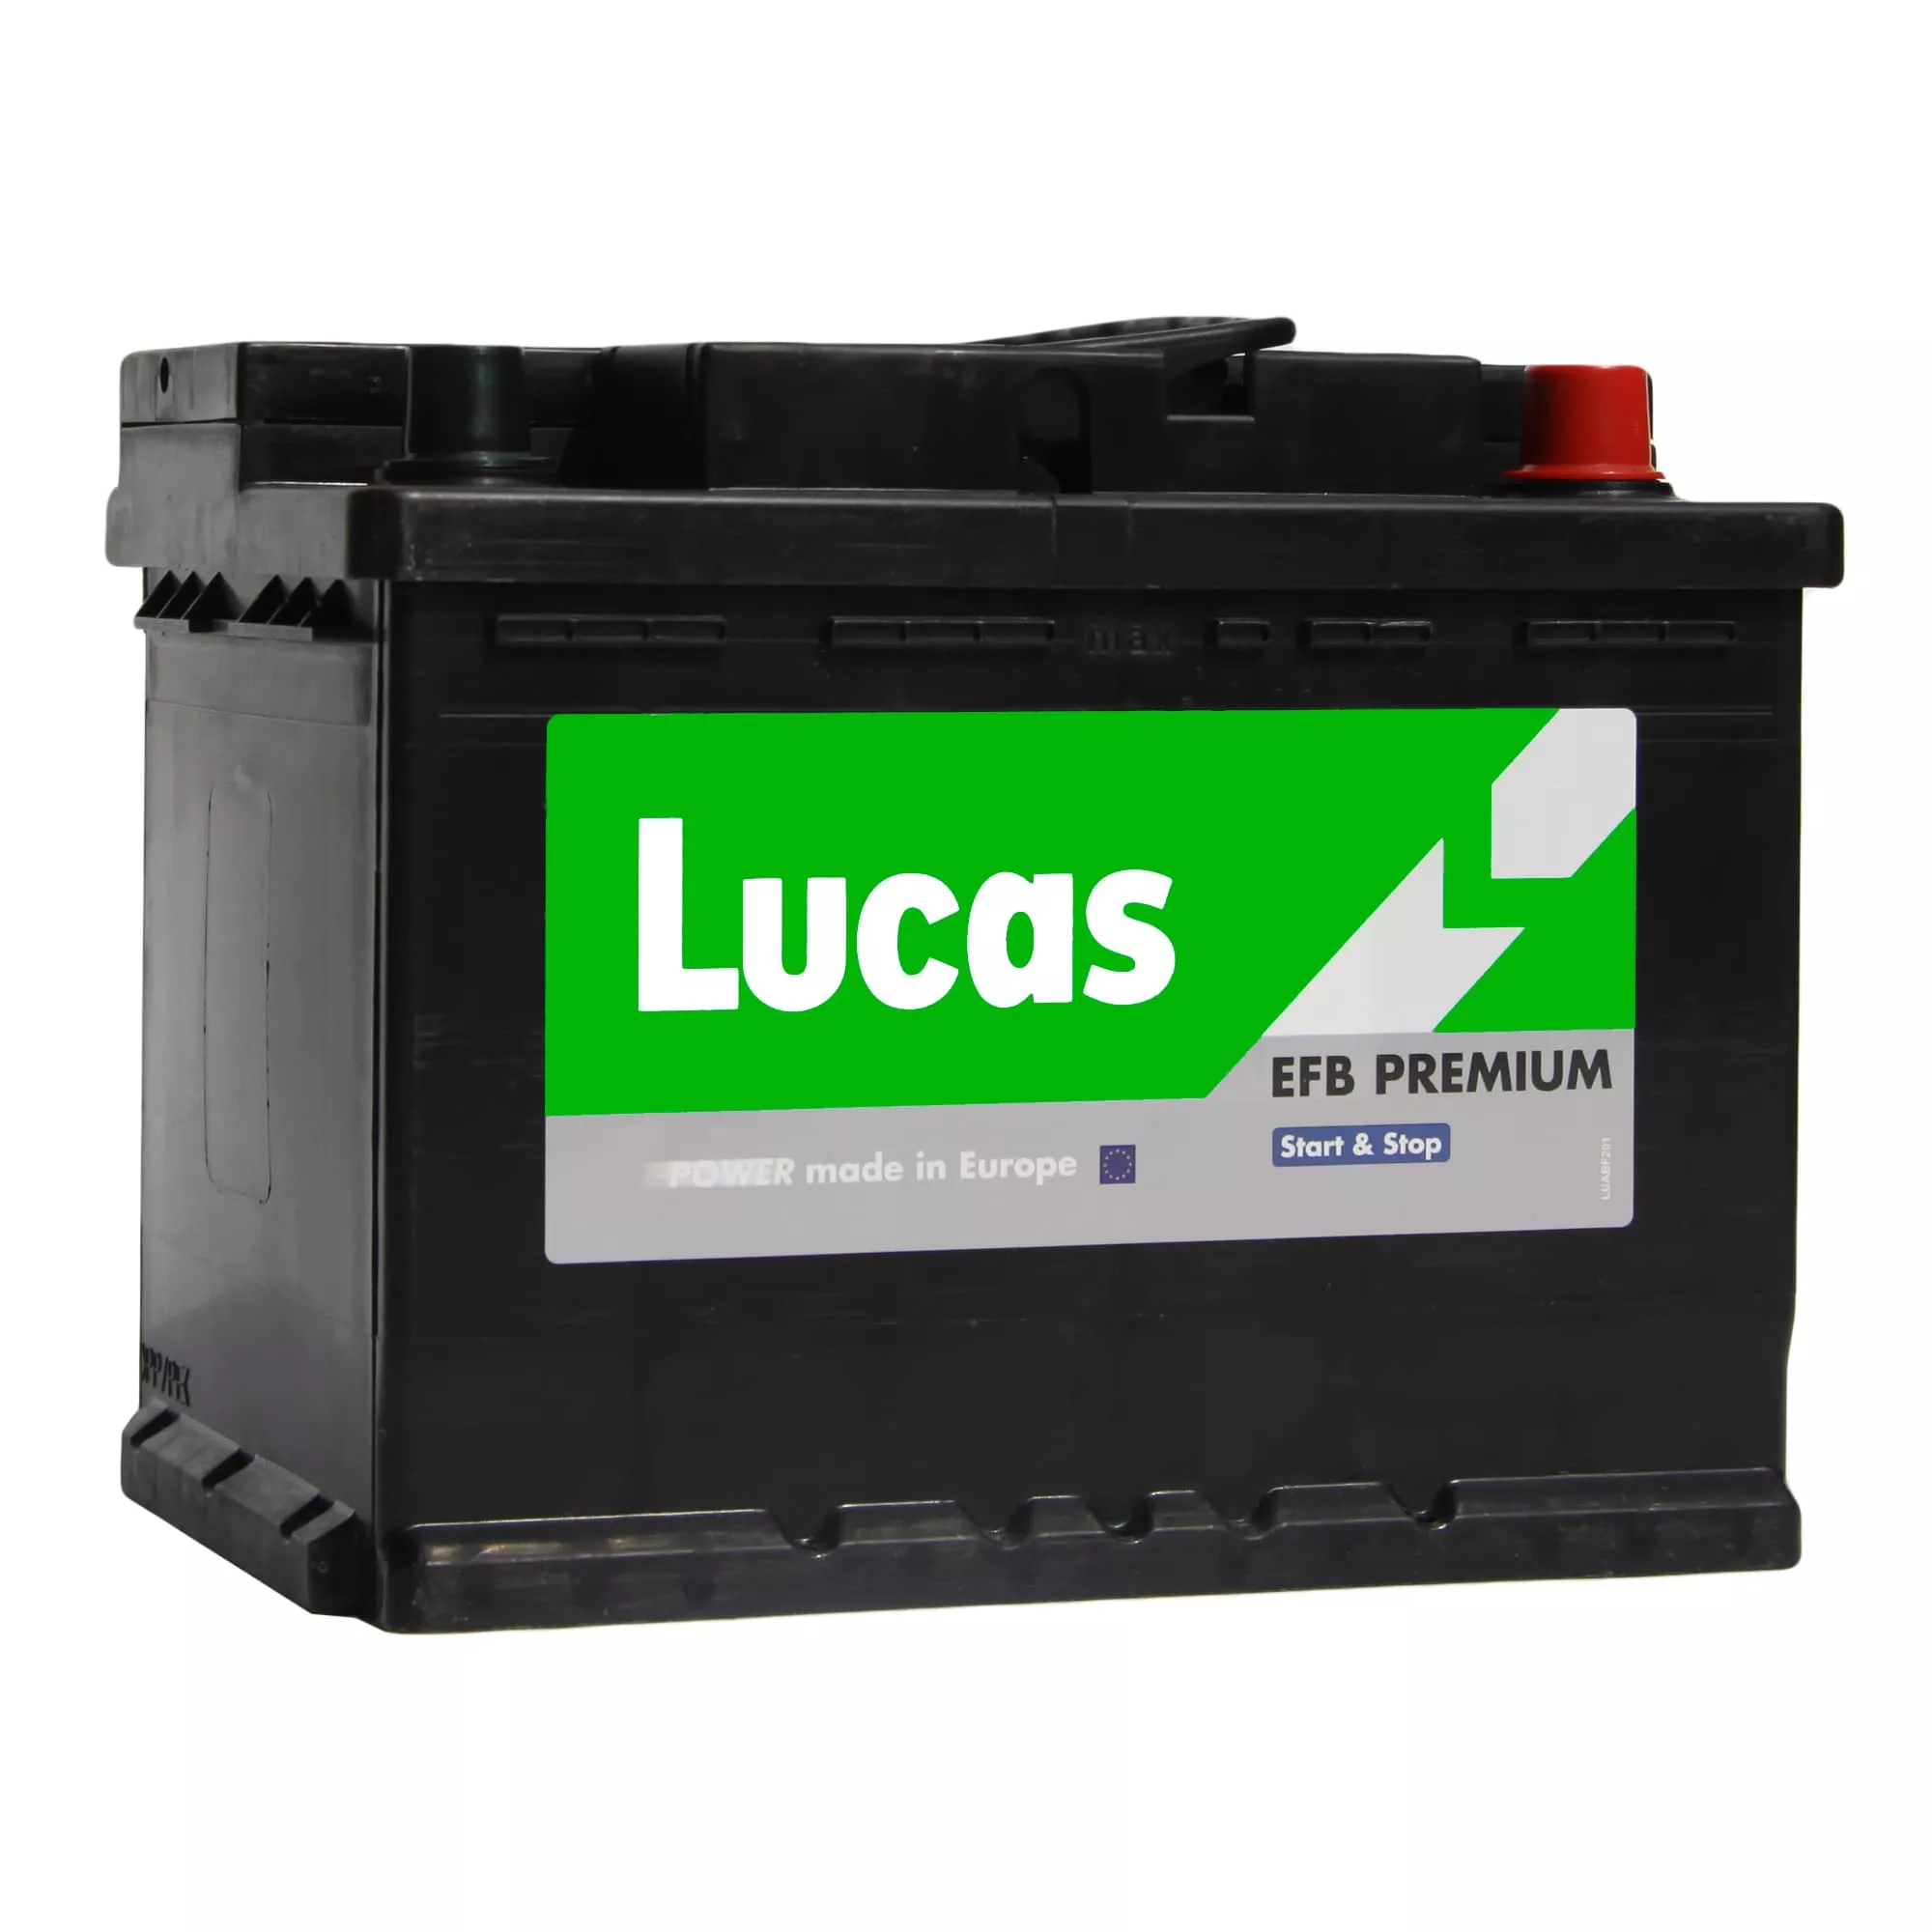 Акумулятор Lucas (Batteries manufactured by Exide in Spain) 6CT-60 АзЕ EFB Start-Stop (LBEFB001A)